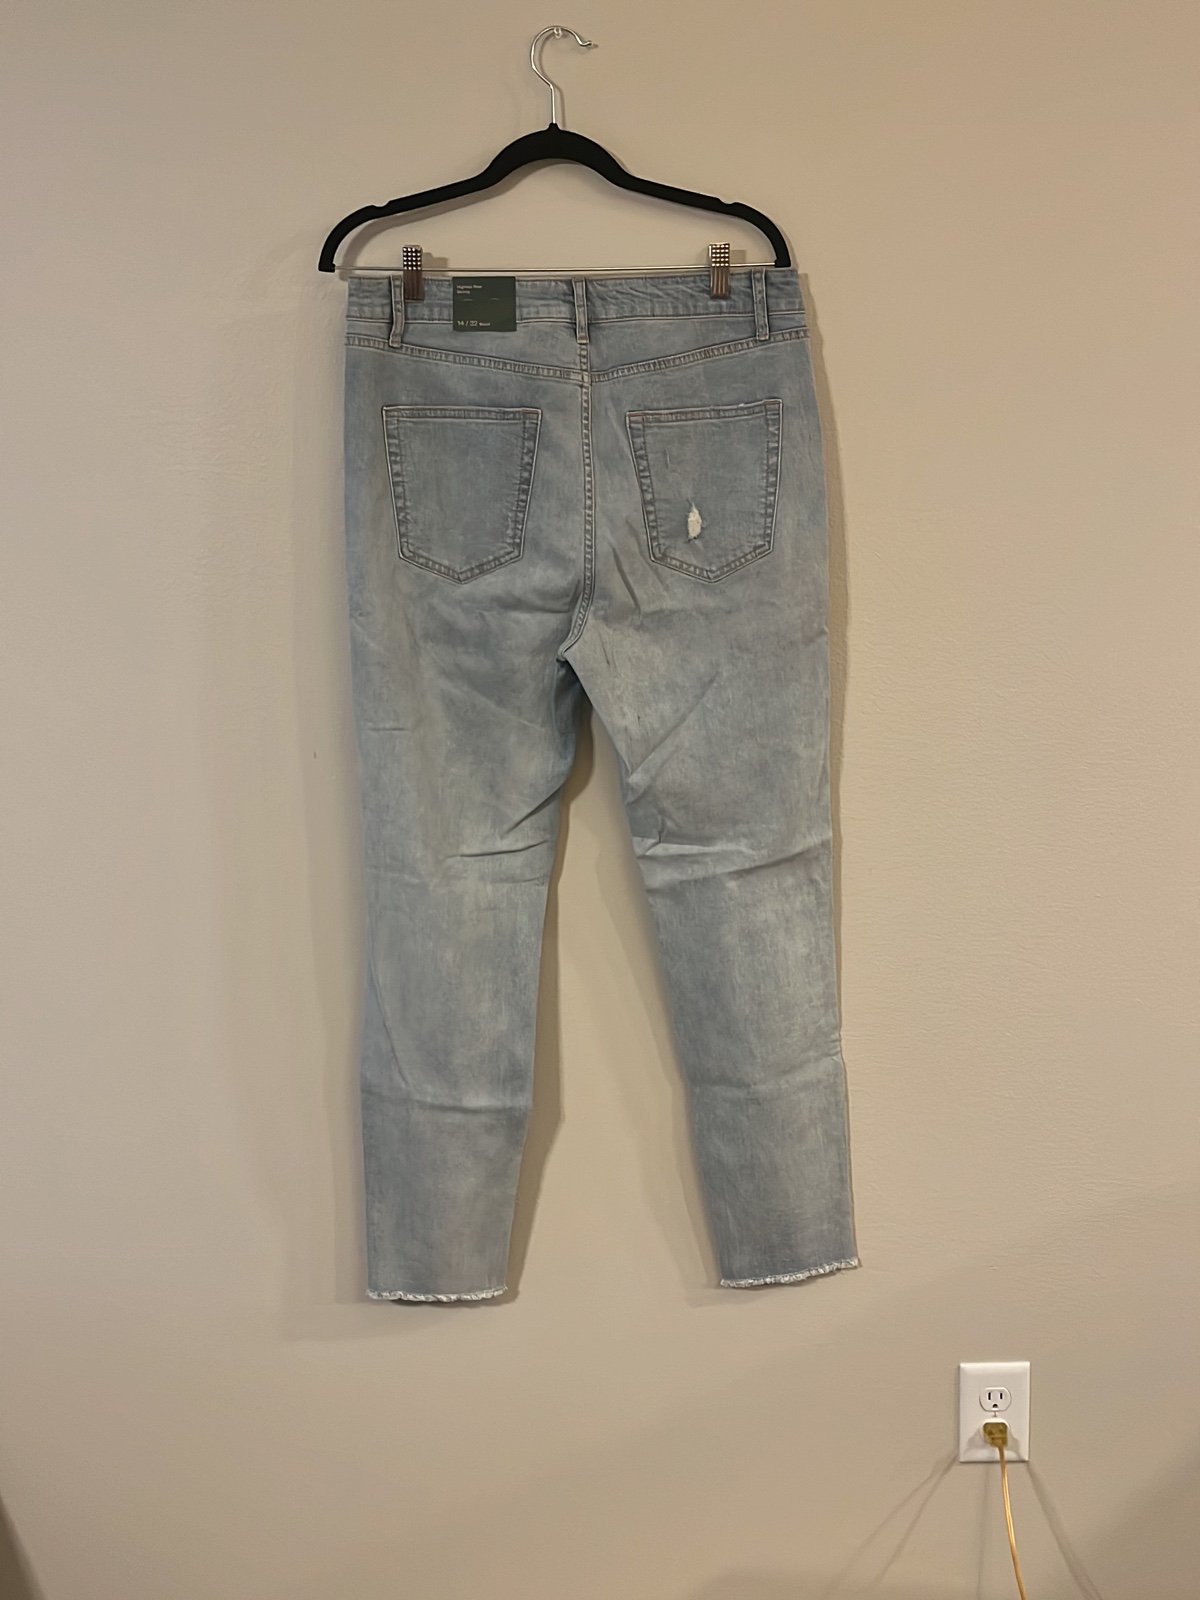 Perfect Wild Fable Jeans FgemSEALJ Outlet Store